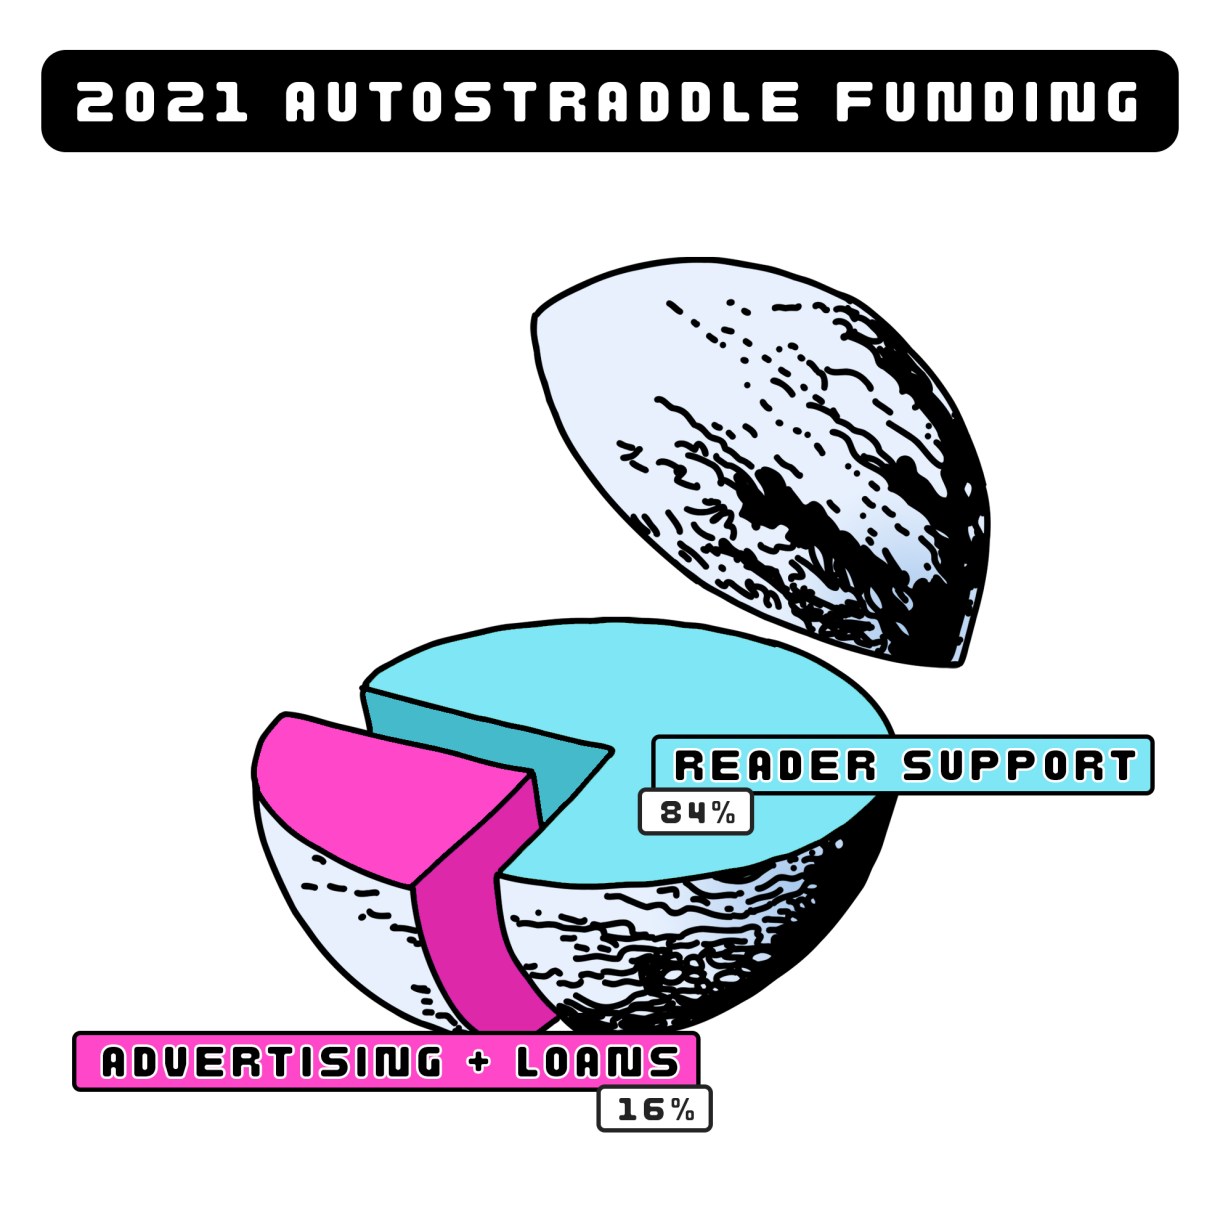 2021 Autostraddle Fundraising shows our budget is comprised of 84% reader support and 16% advertising and loans.